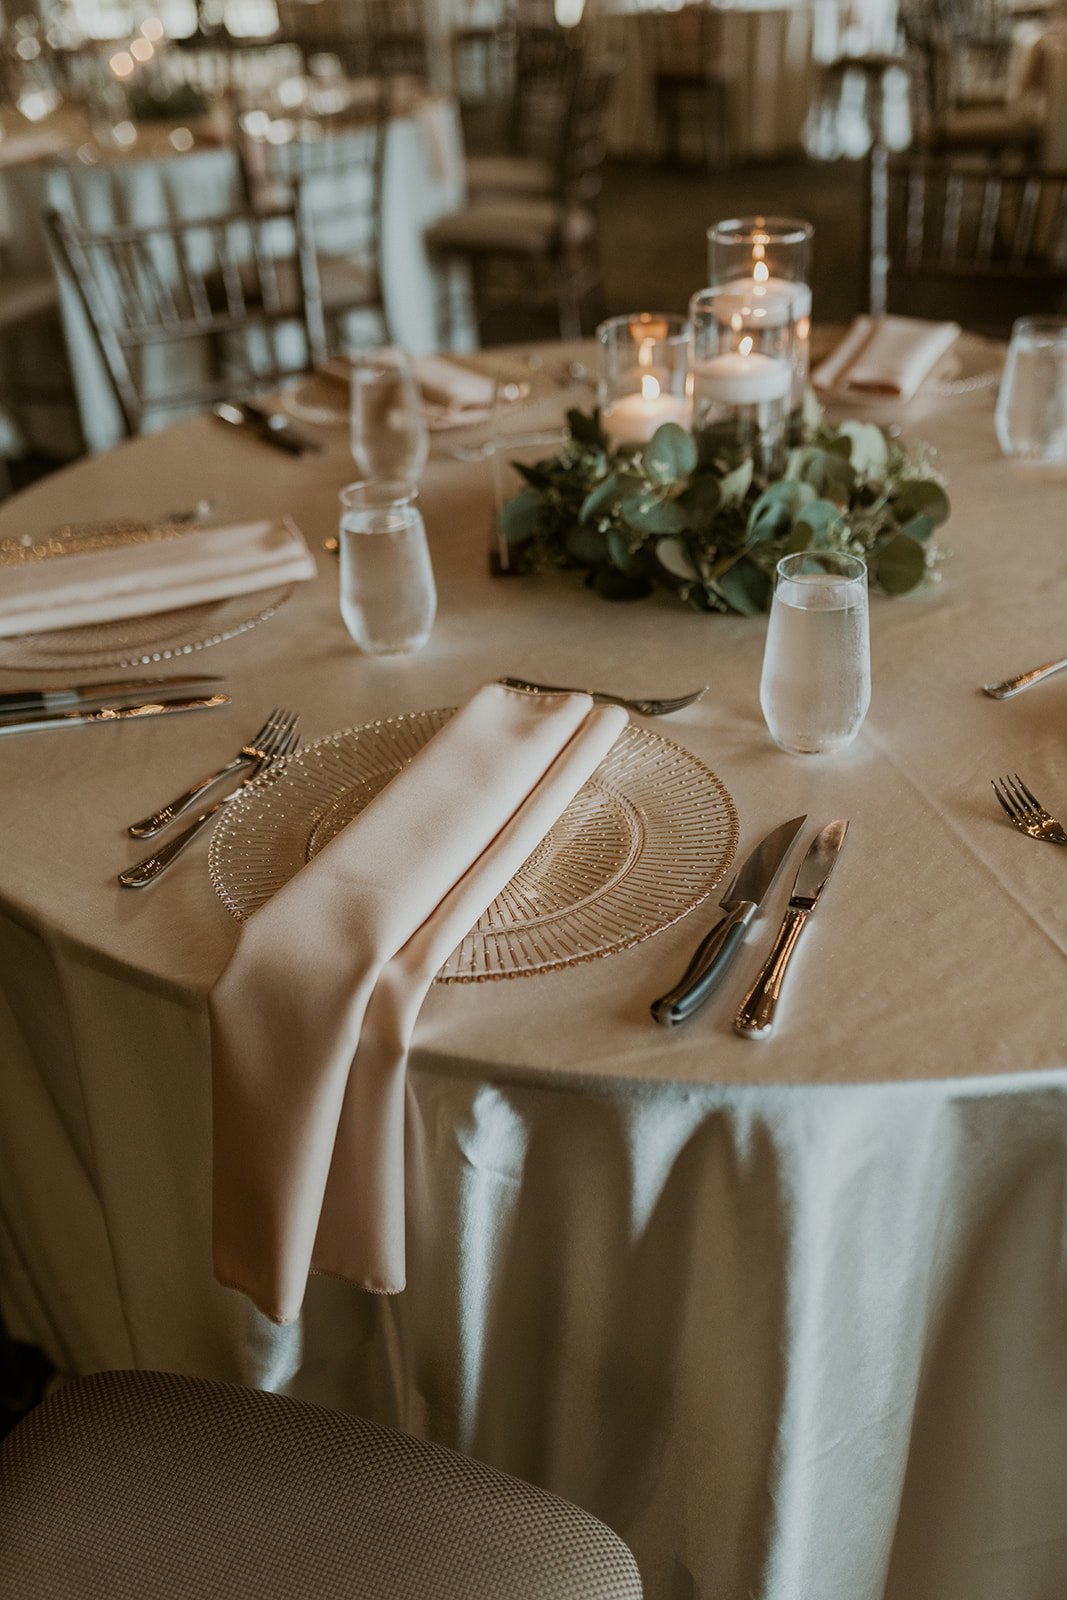 Table setting with white linen and plates decorated with roses and greenery centerpieces.